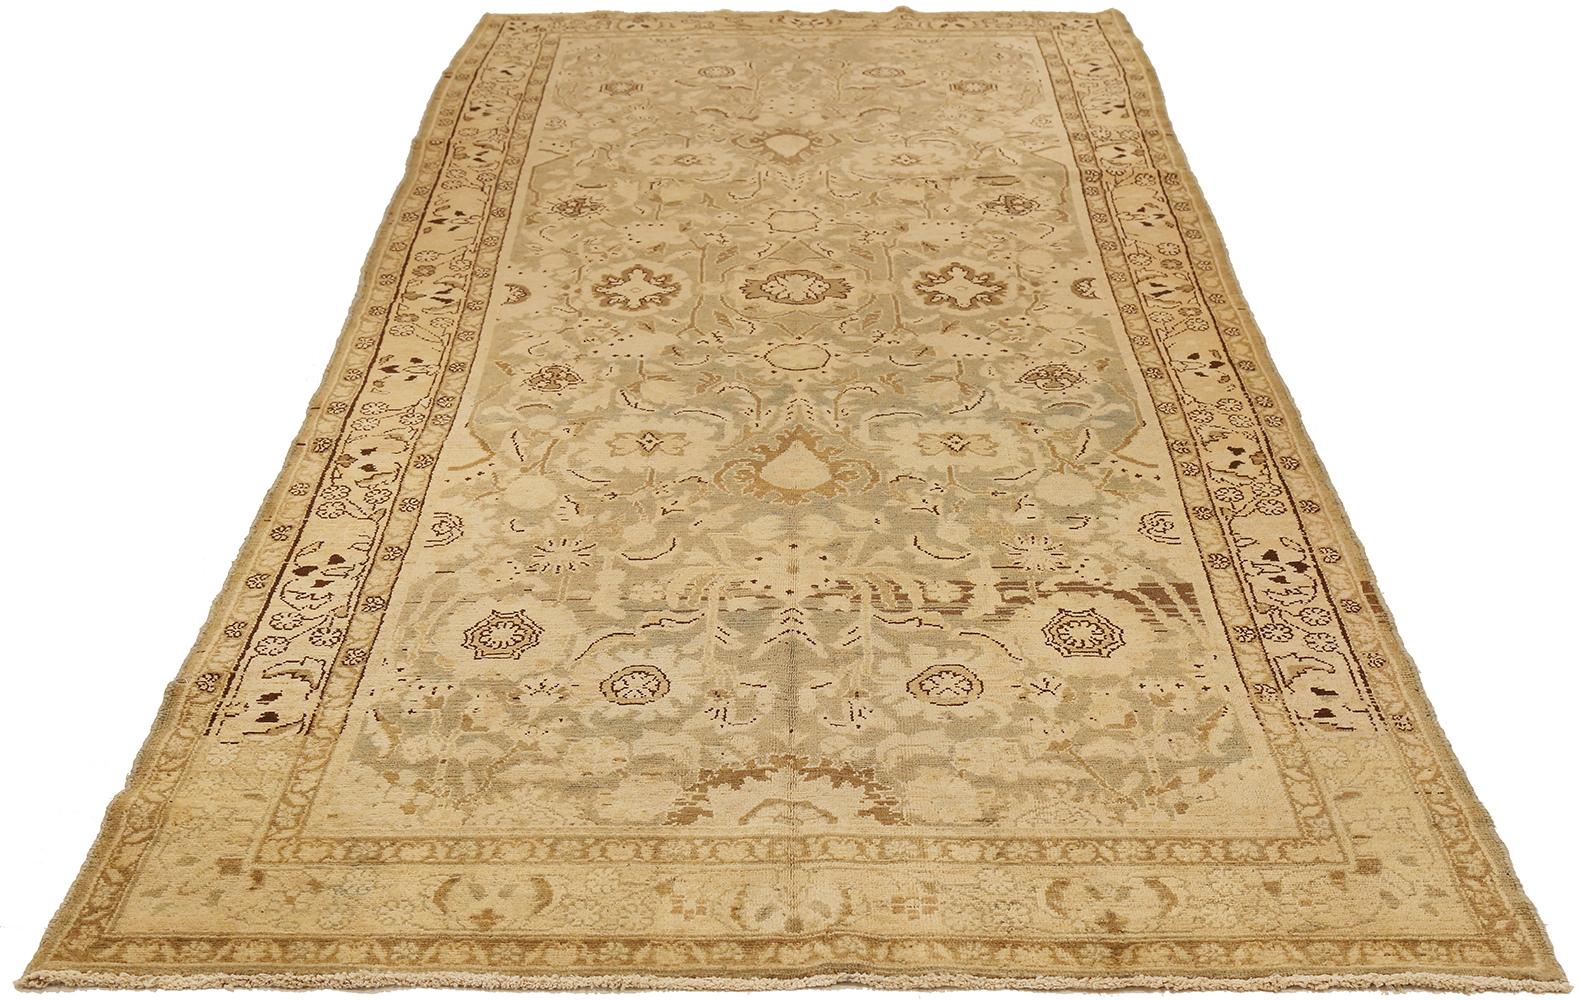 Antique Persian rug handwoven from the finest sheep’s wool and colored with all-natural vegetable dyes that are safe for humans and pets. It’s a traditional Malayer design featuring beige and brown floral details over an ivory field. It’s a lovely